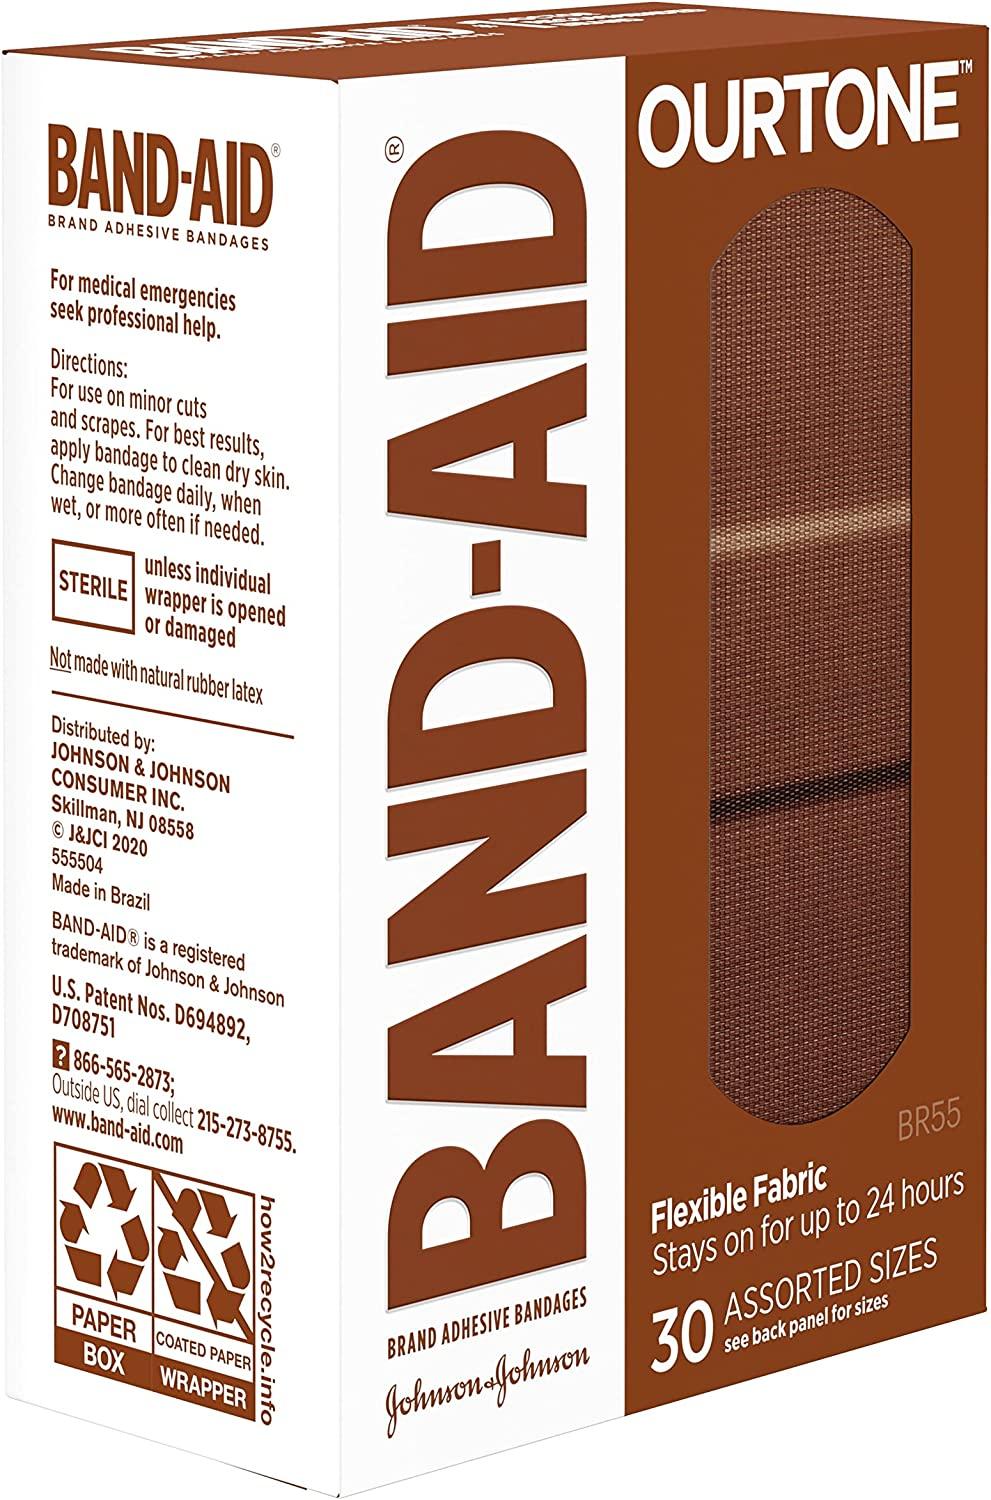 Band-Aid Brand Ourtone Flexible Fabric Adhesive Bandages, Flexible  Protection & Care of Minor Cuts & Scrapes, Quilt-Aid Pad for Painful  Wounds, BR55, Assorted Sizes, 30 Count